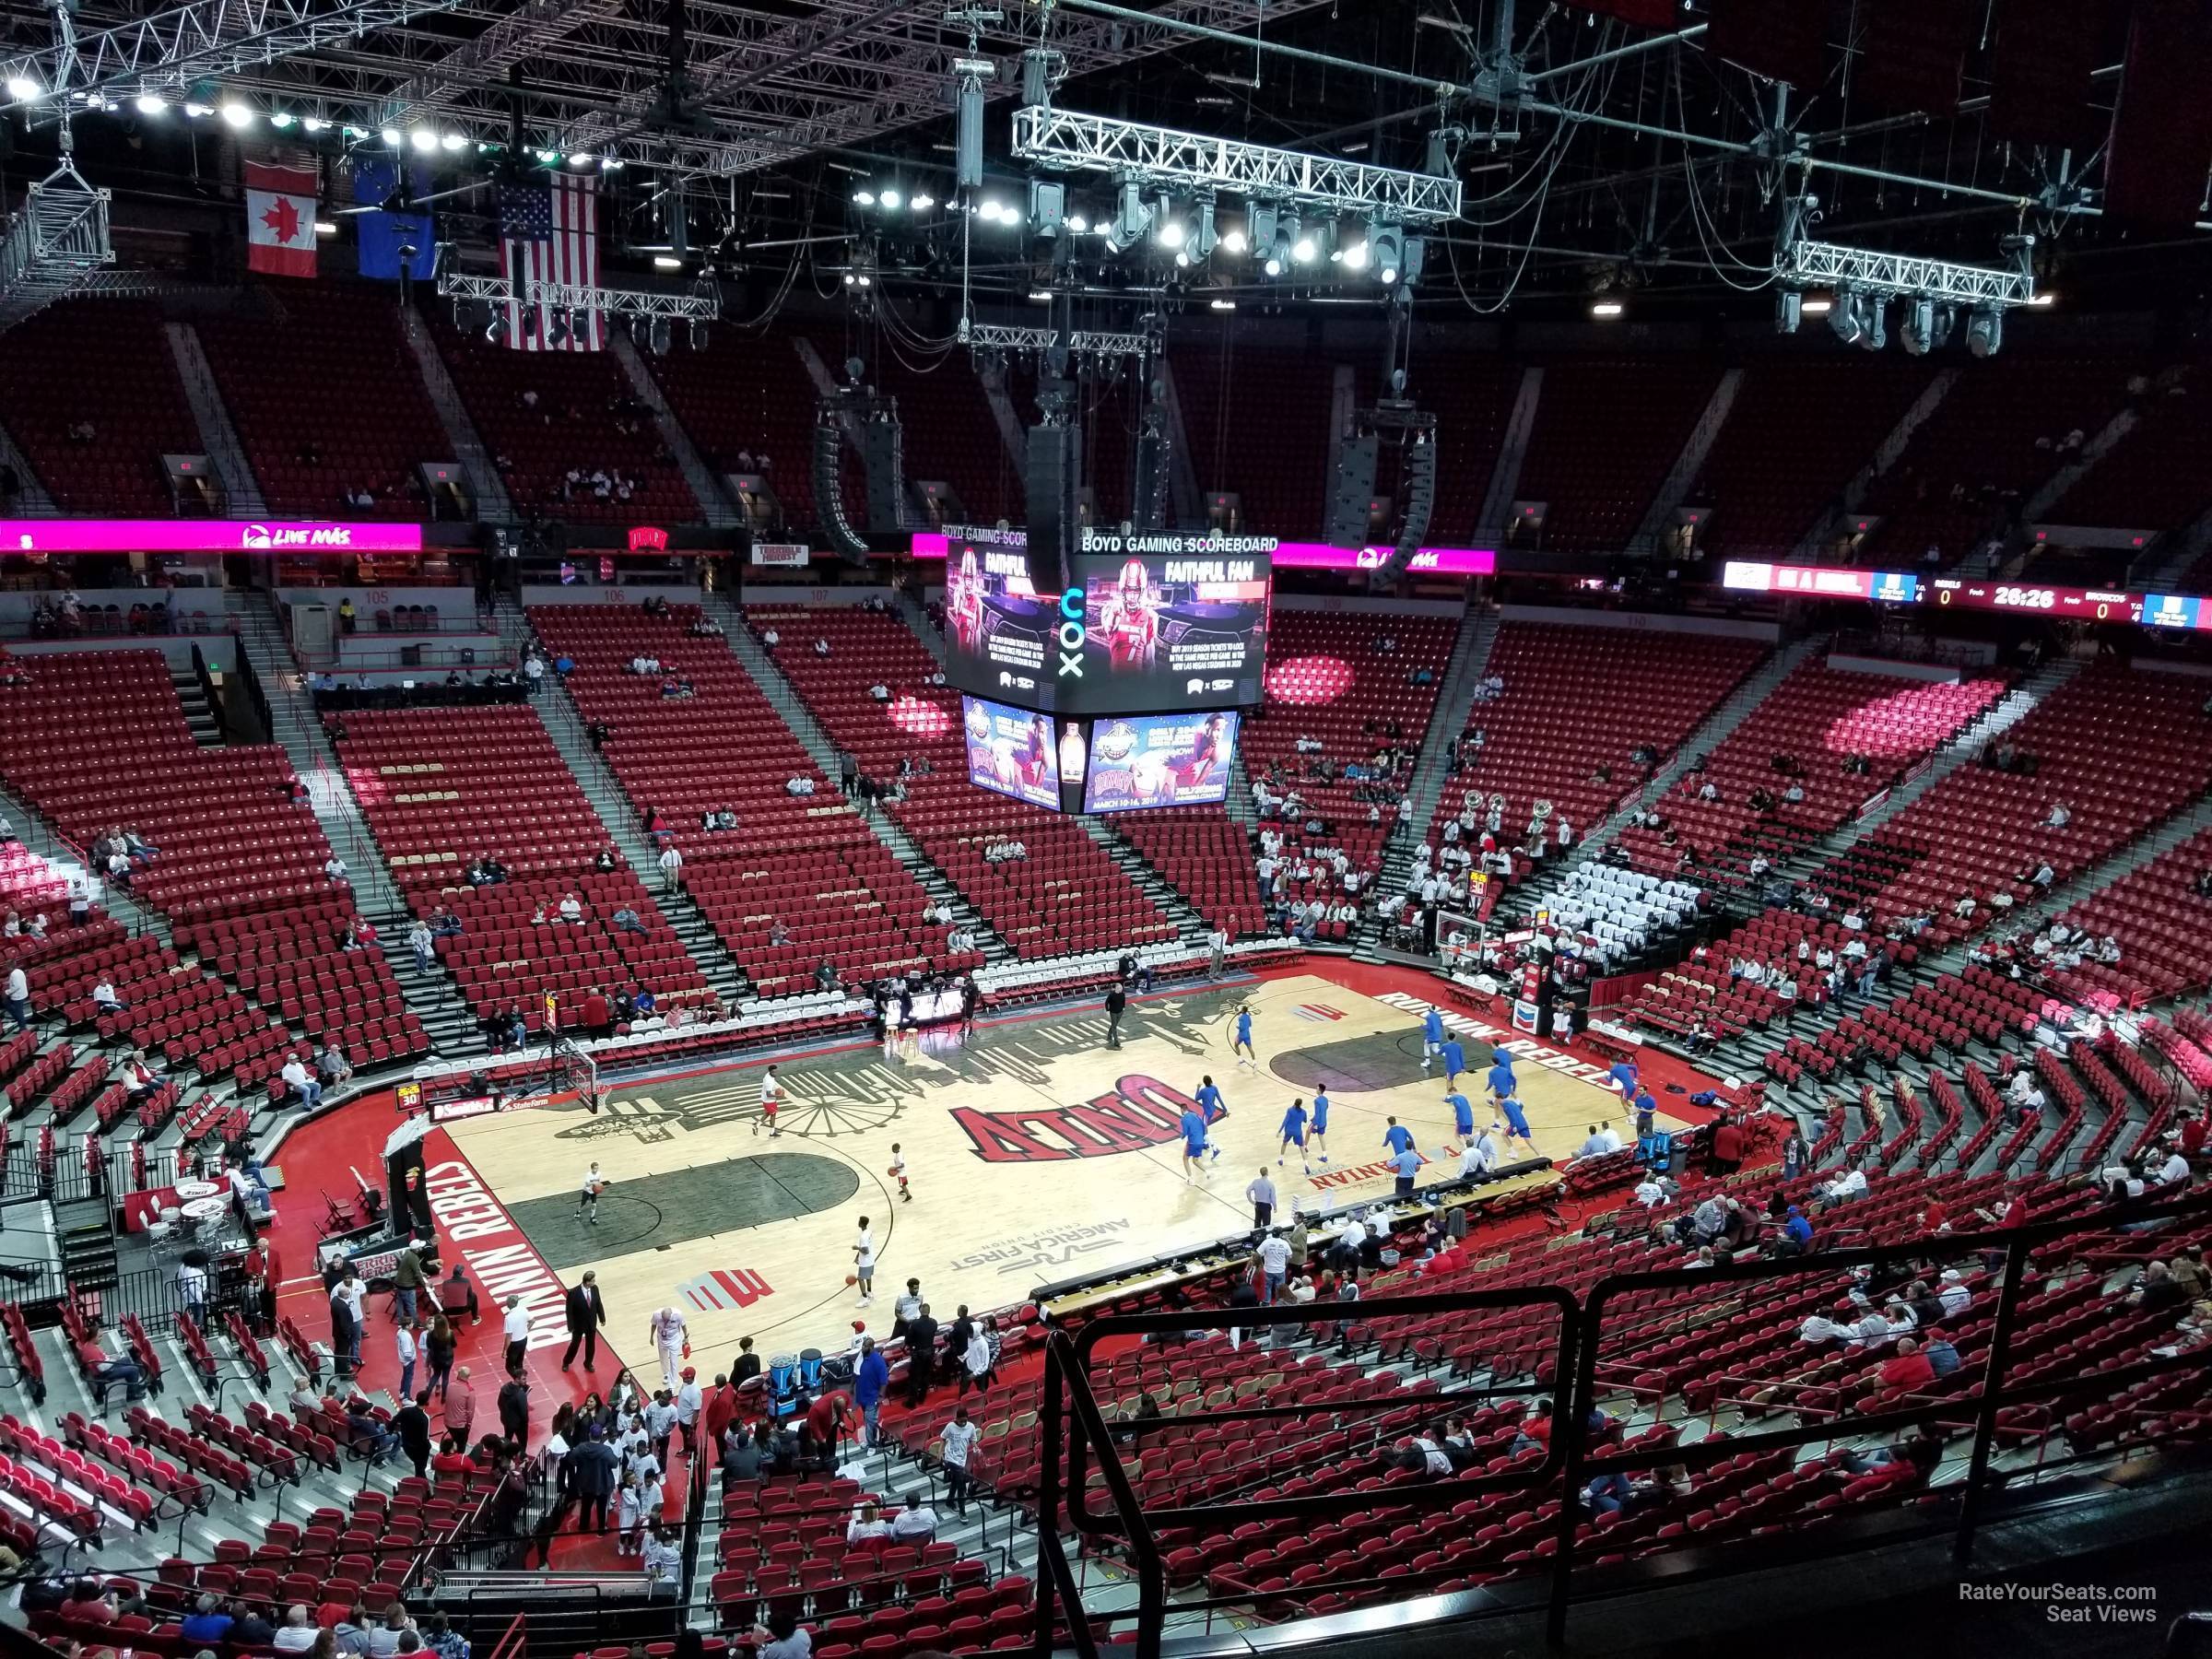 section 230, row e seat view  - thomas and mack center